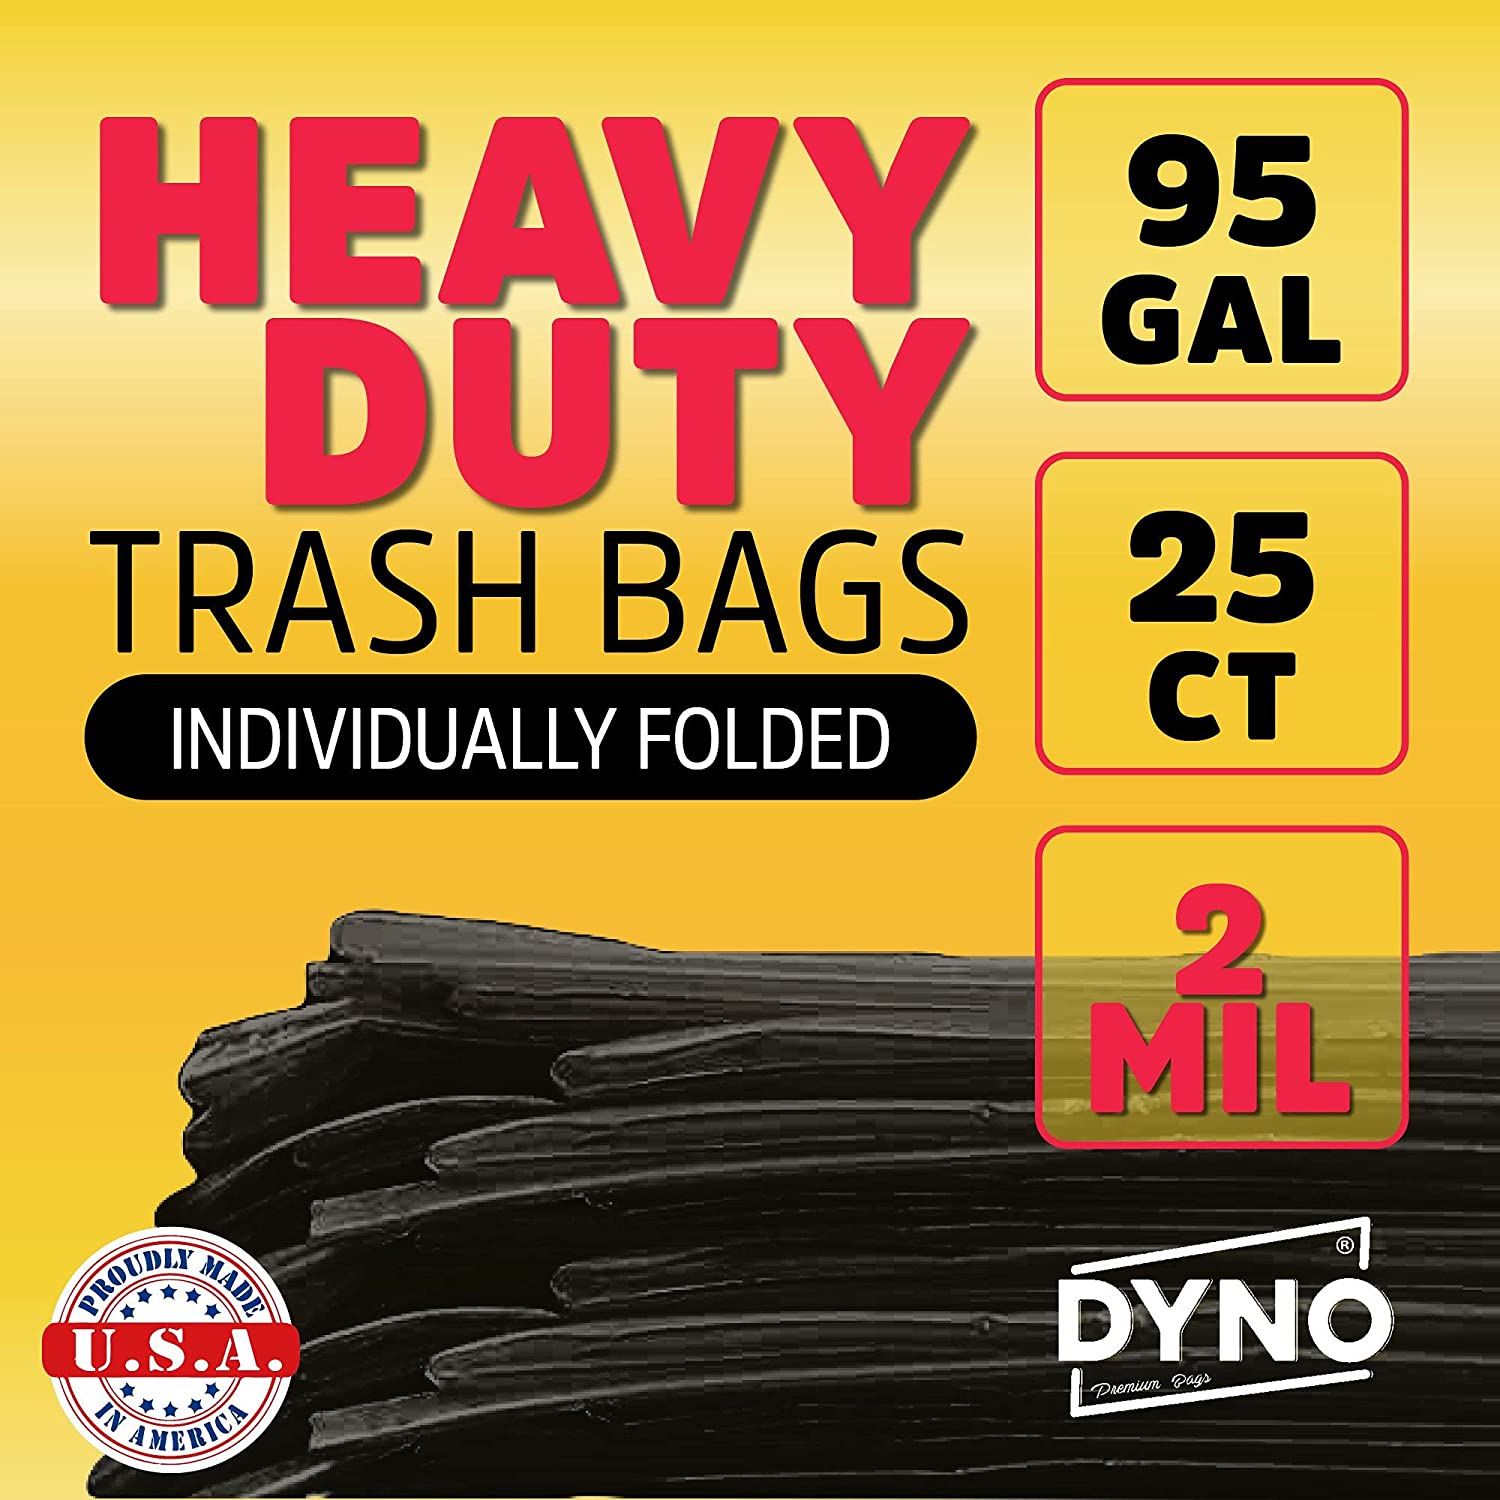 95 Gallon Trash Bags Super Big Mouth Large Industrial 95 GAL Garbage Bags  Can Liners